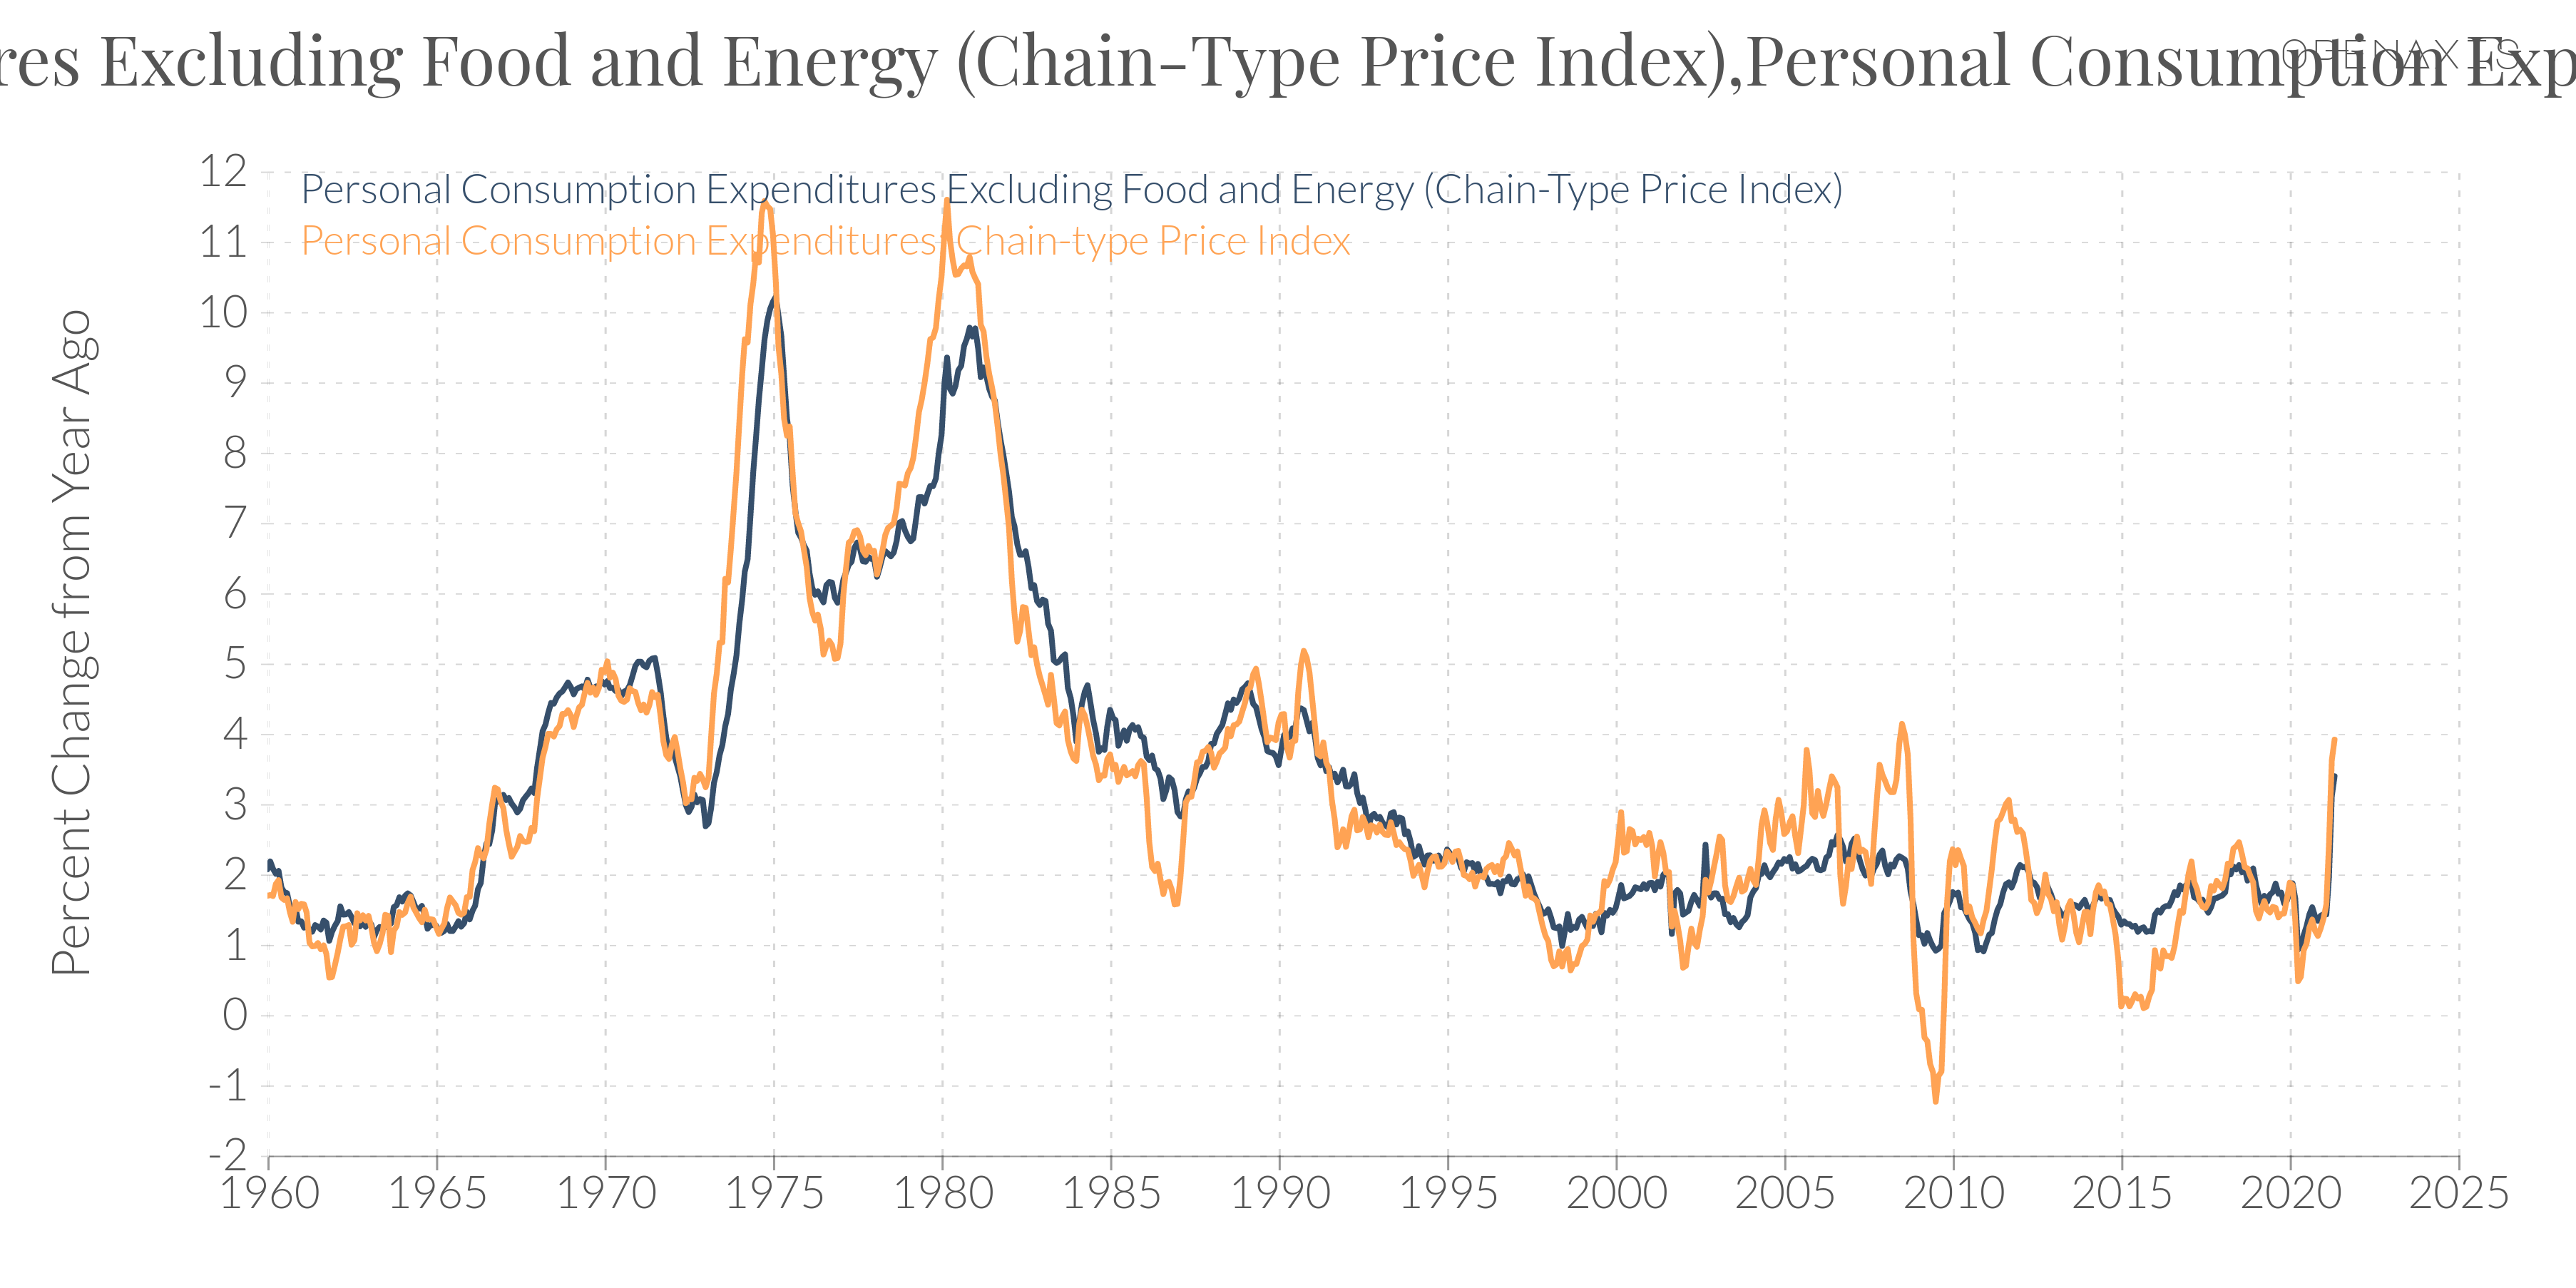 "Personal Consumption Expenditures Excluding Food and Energy (Chain-Type Price Index),Personal Consumption Expenditures: Chain-type Price Index"